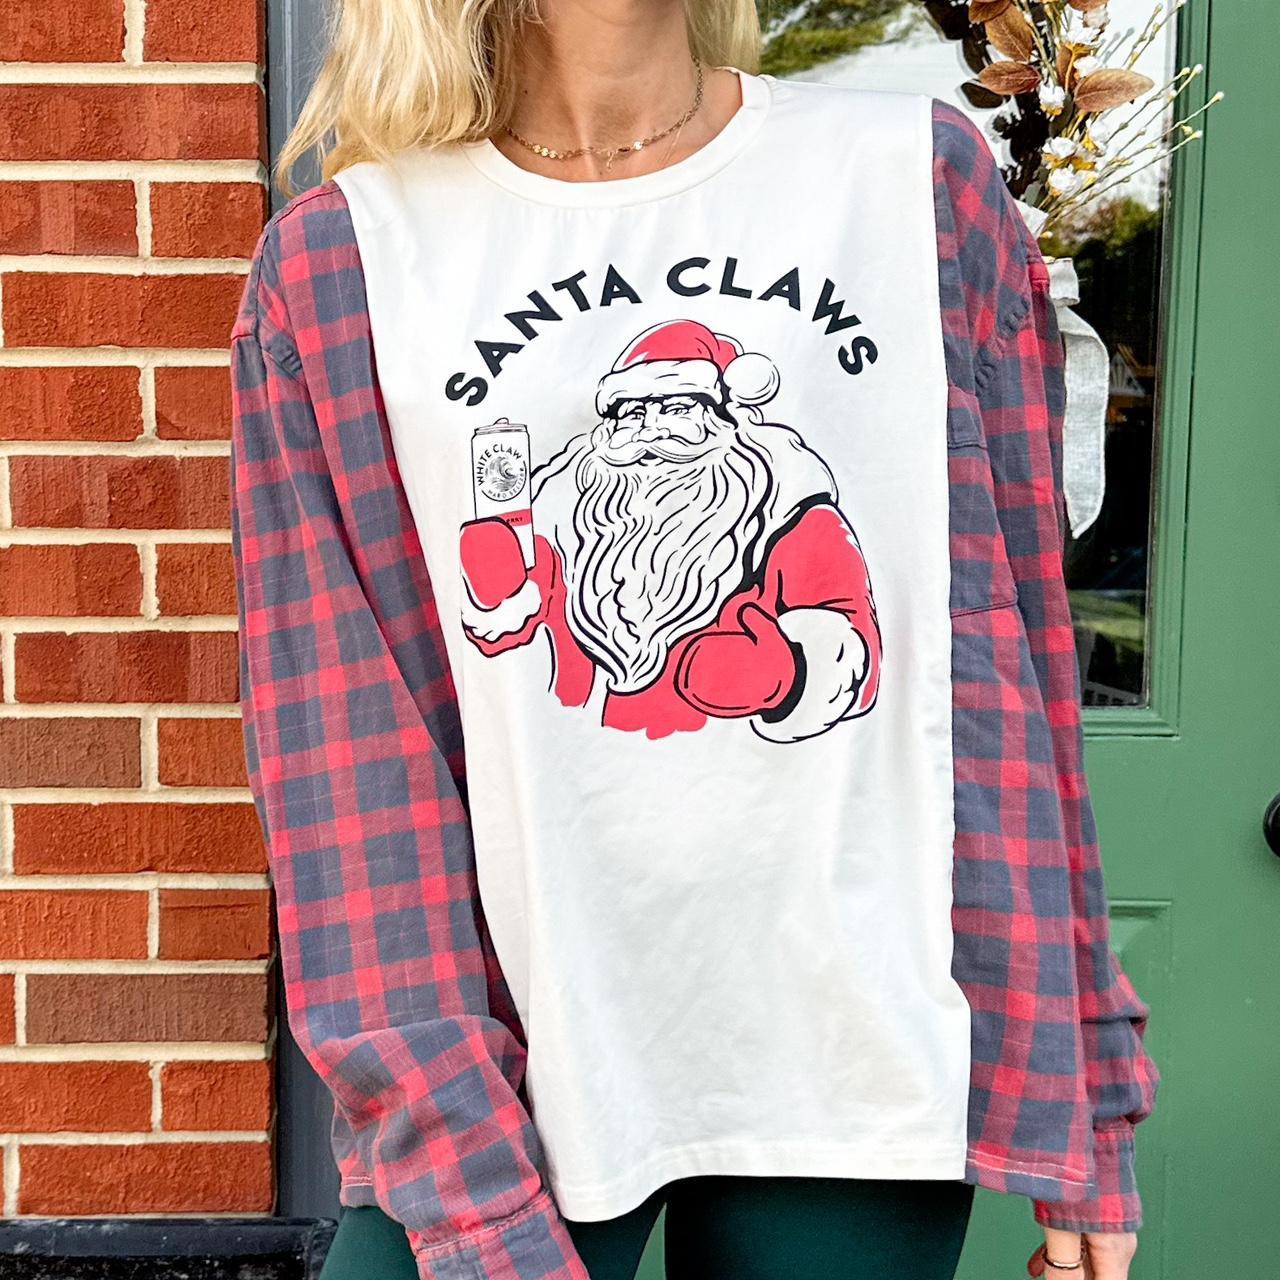 A woman wearing a santa claws t - shirt in front of a brick wall.